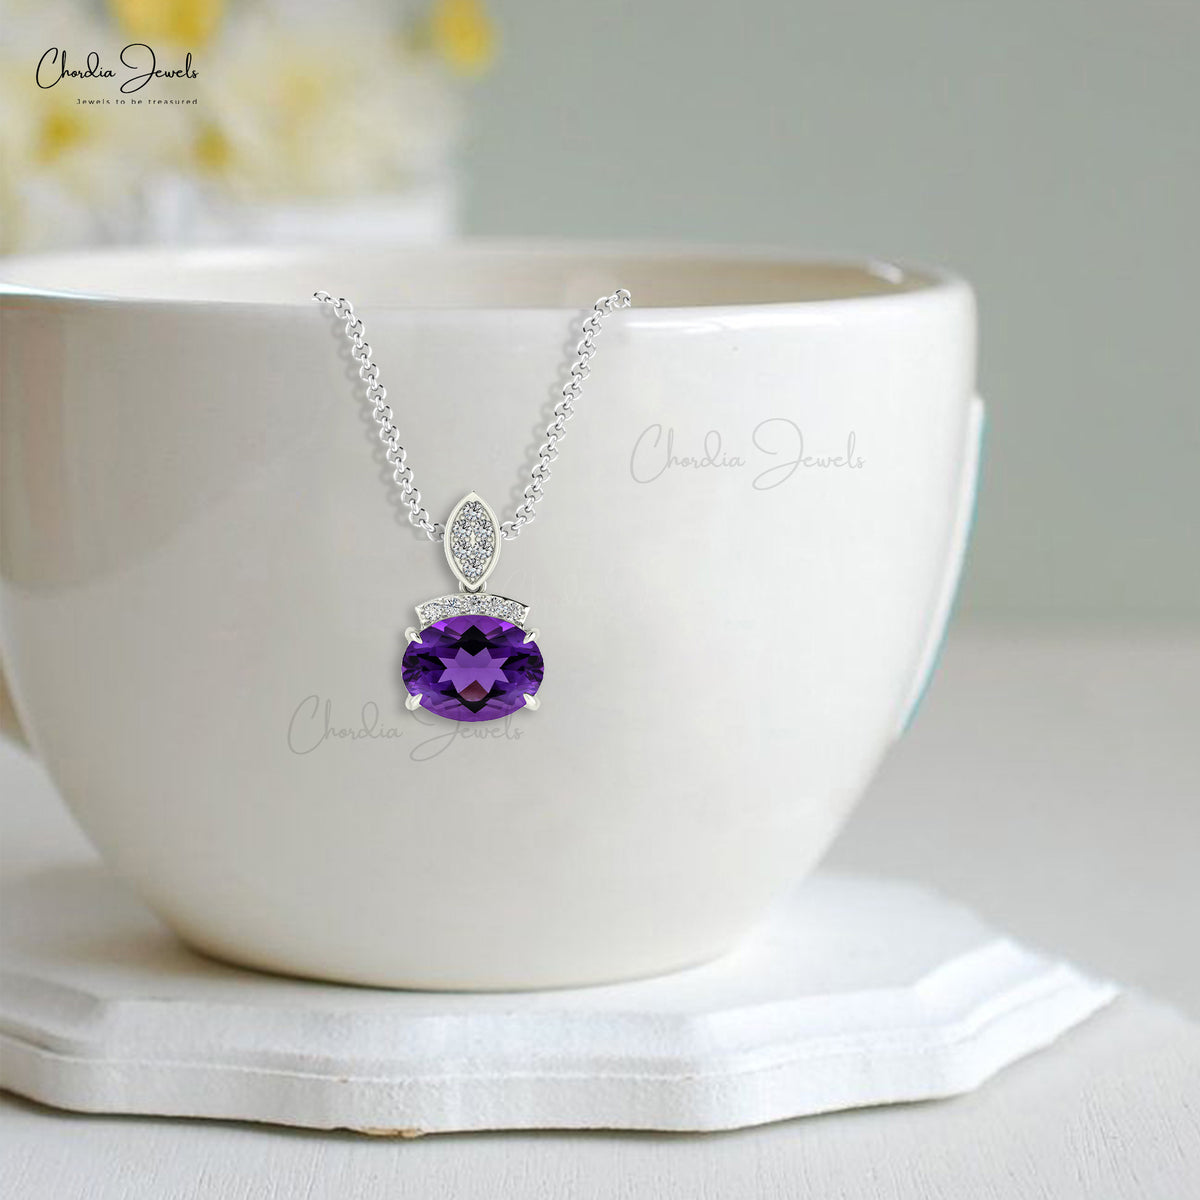 Solid 14k White Gold 10mm Round Amethyst and .07 Cttw Diamond Charm Pendant  Chain Necklace 16